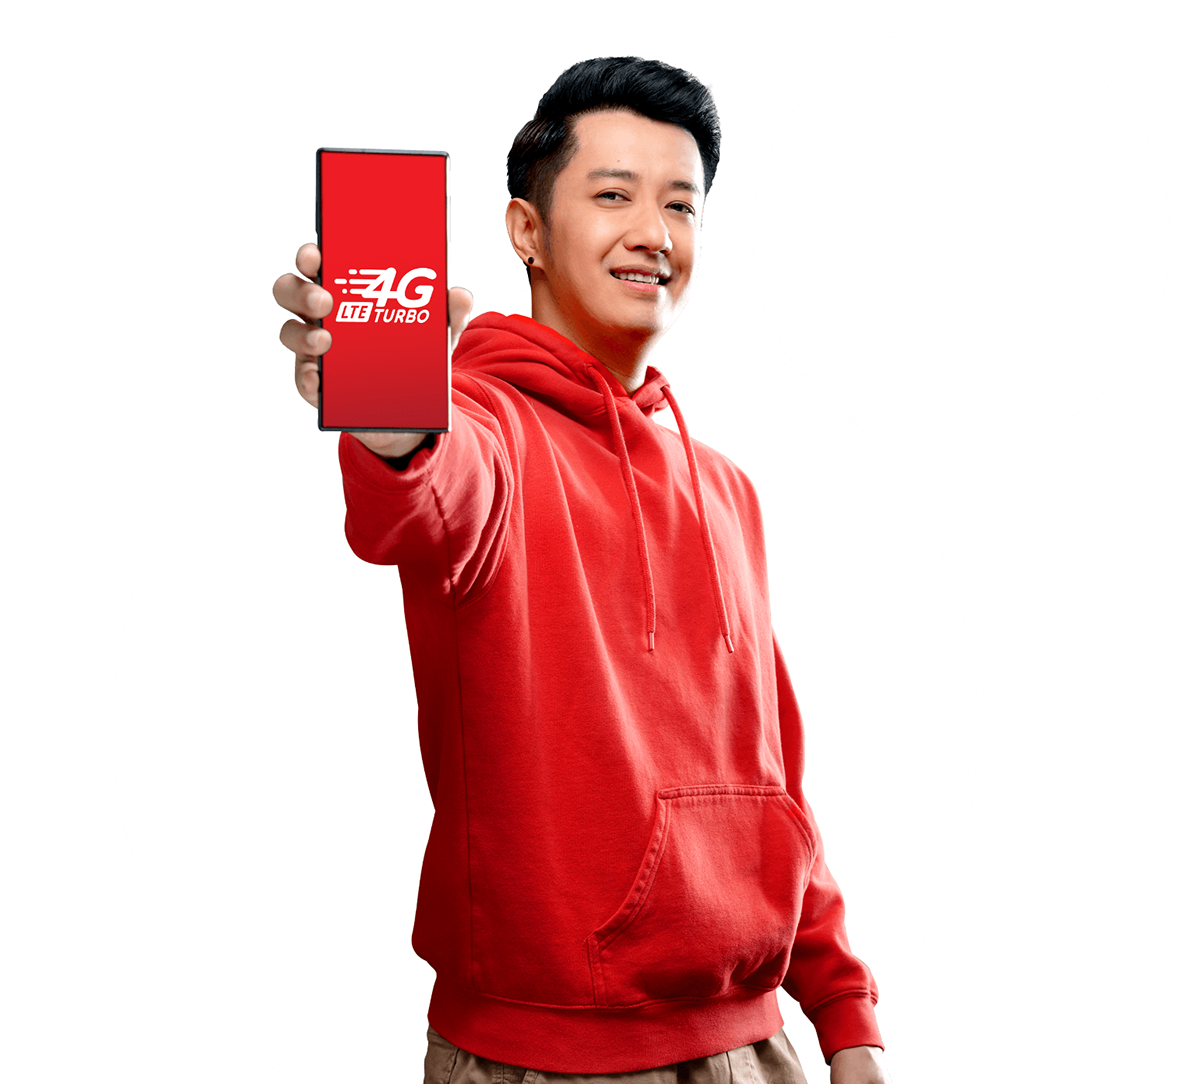 4g activation ad campaign Advertising  campaign Internet laugh mobile myanmar ooredoo